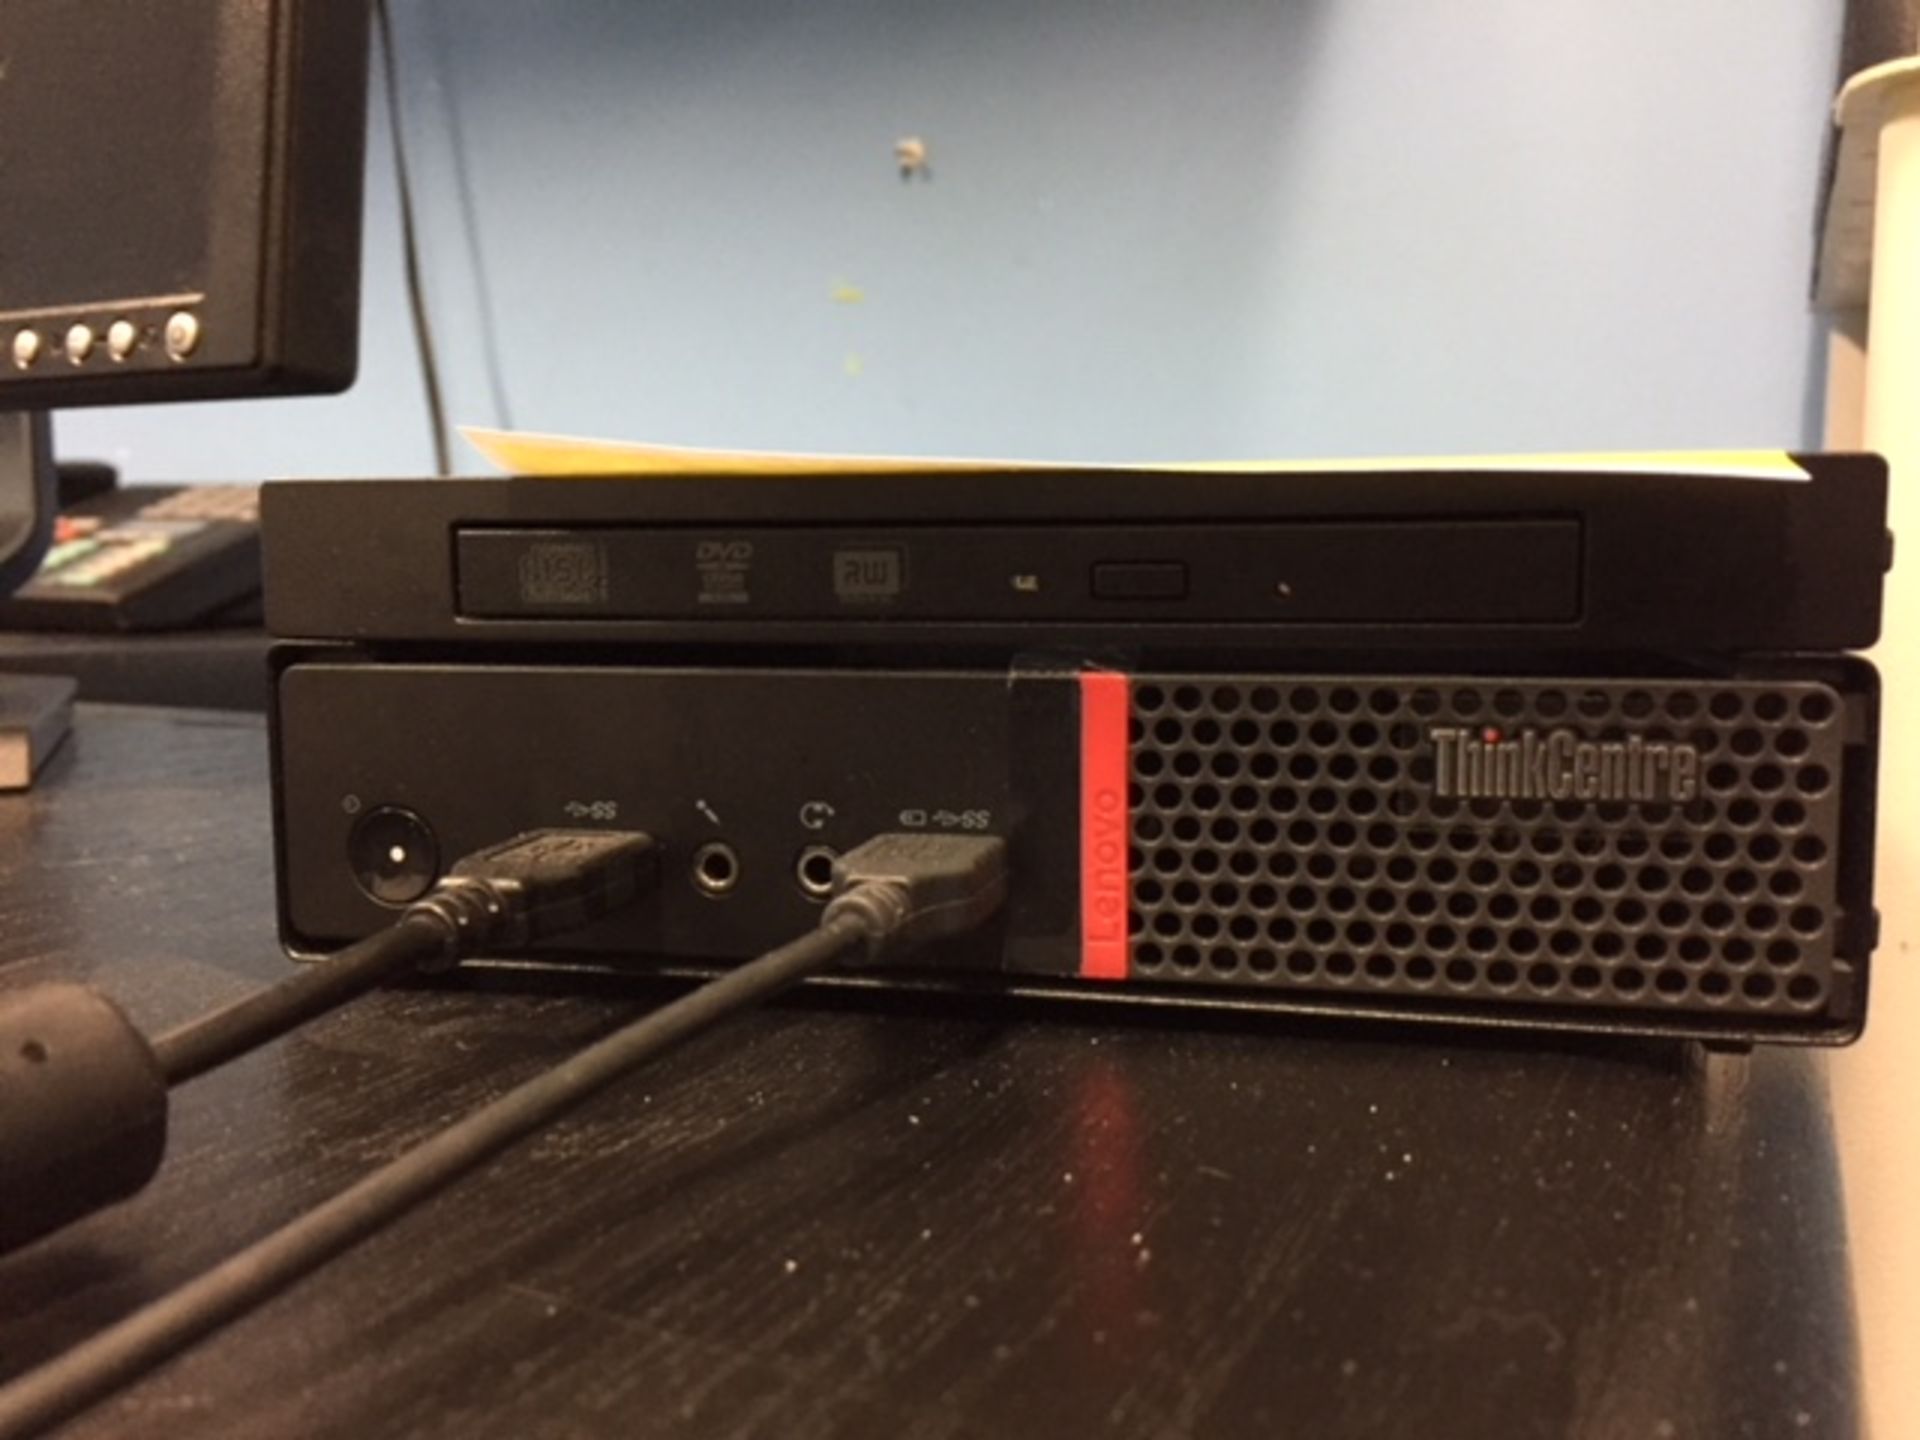 LENOVO, M700, PORTABLE HARD DRIVE (LOCATED IN MISSISSAUGA)